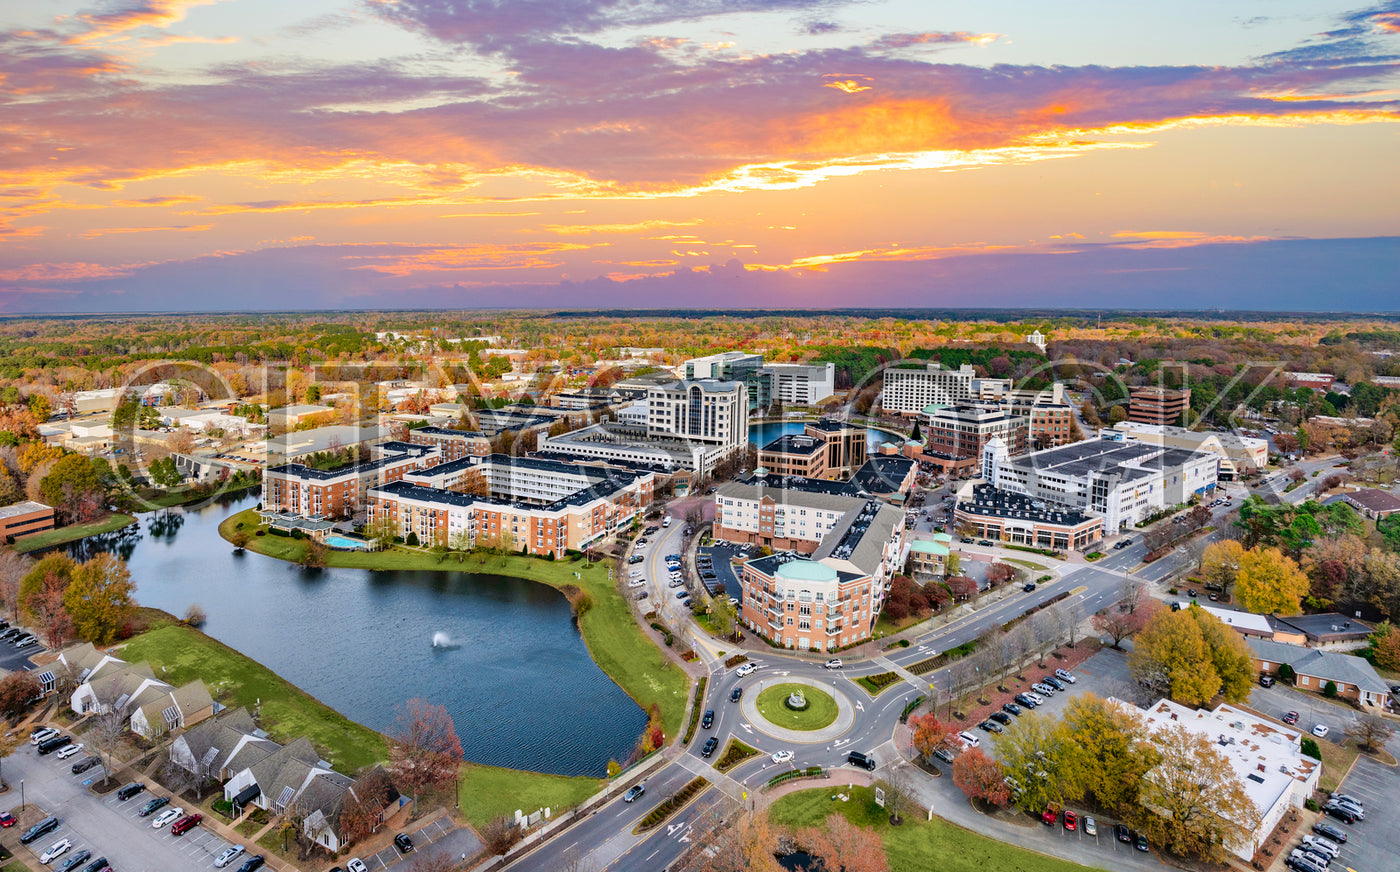 Aerial sunset view over Newport News, Virginia, showcasing urban and natural beauty